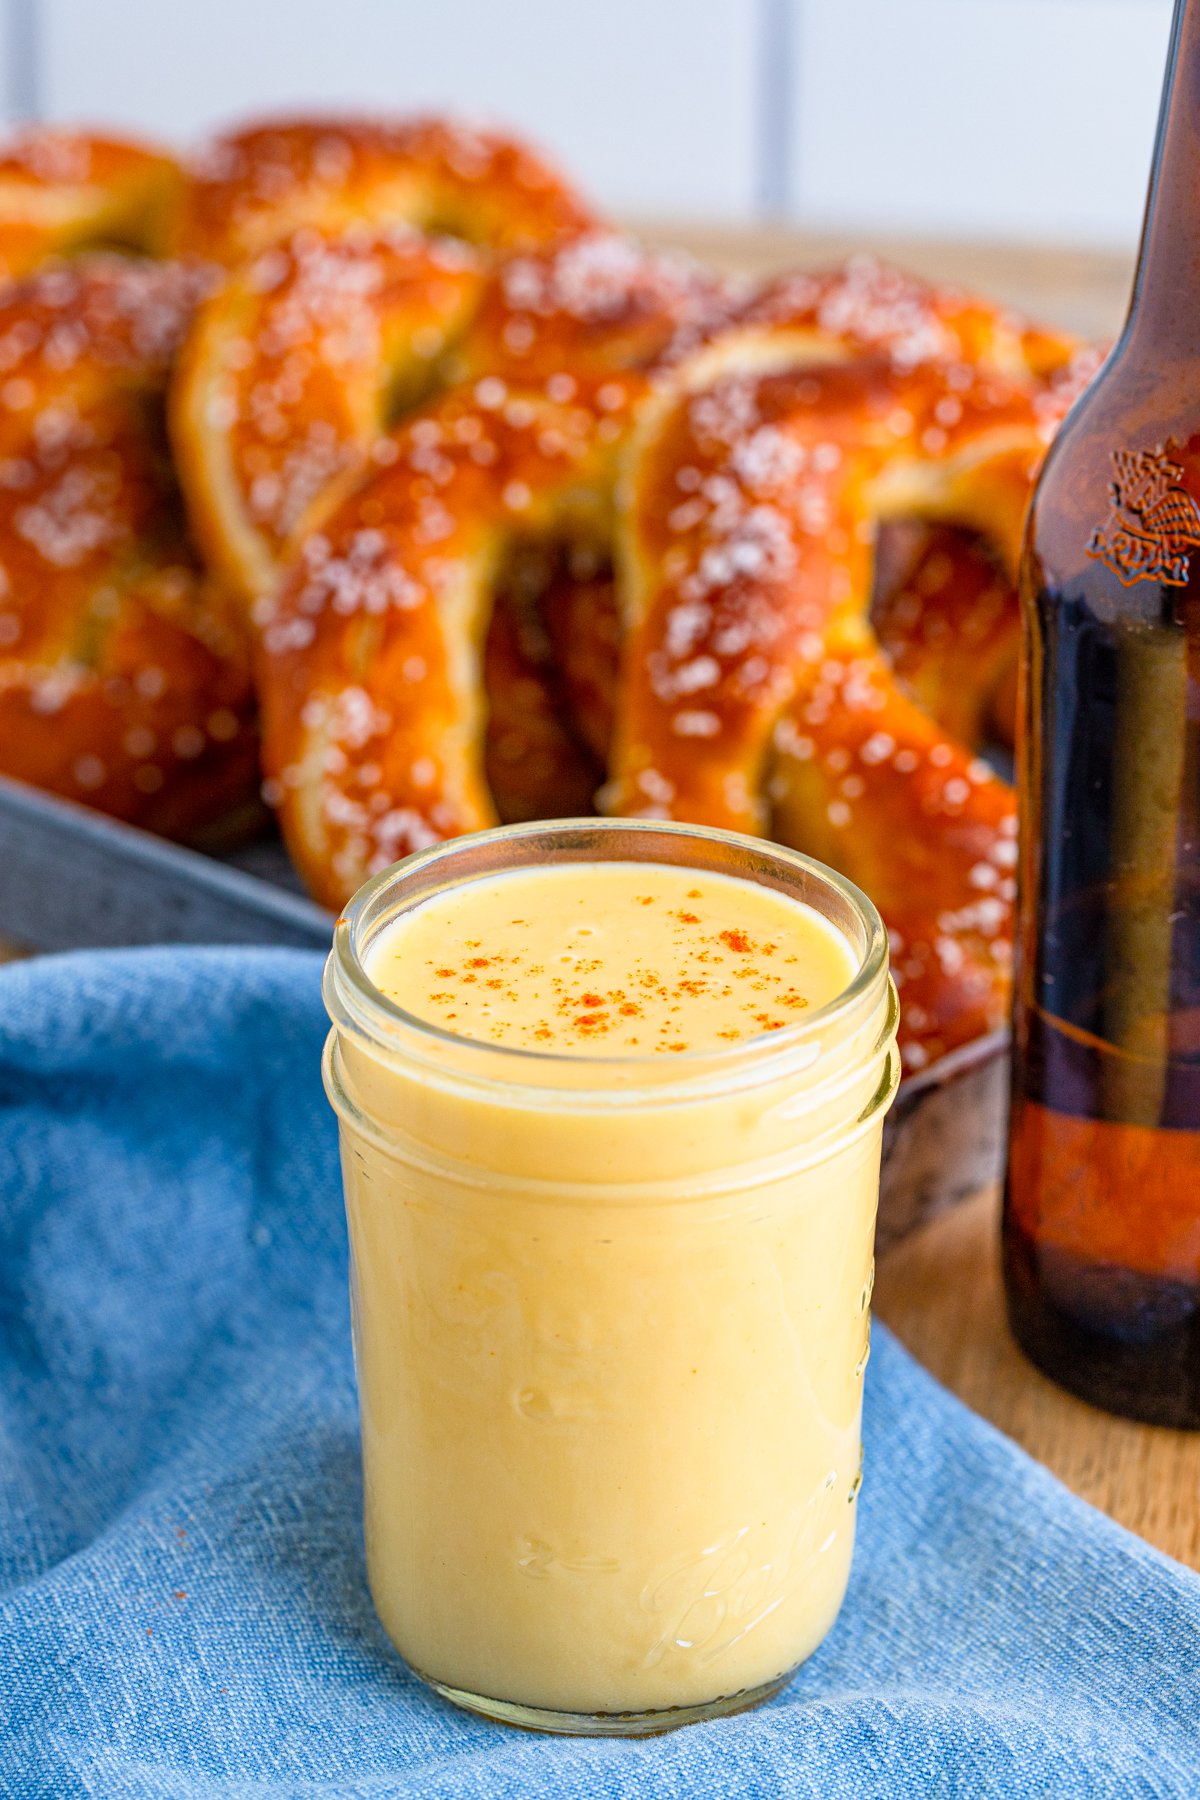 Jar filled with Creamy Beer Cheese Dip with pretzels in background